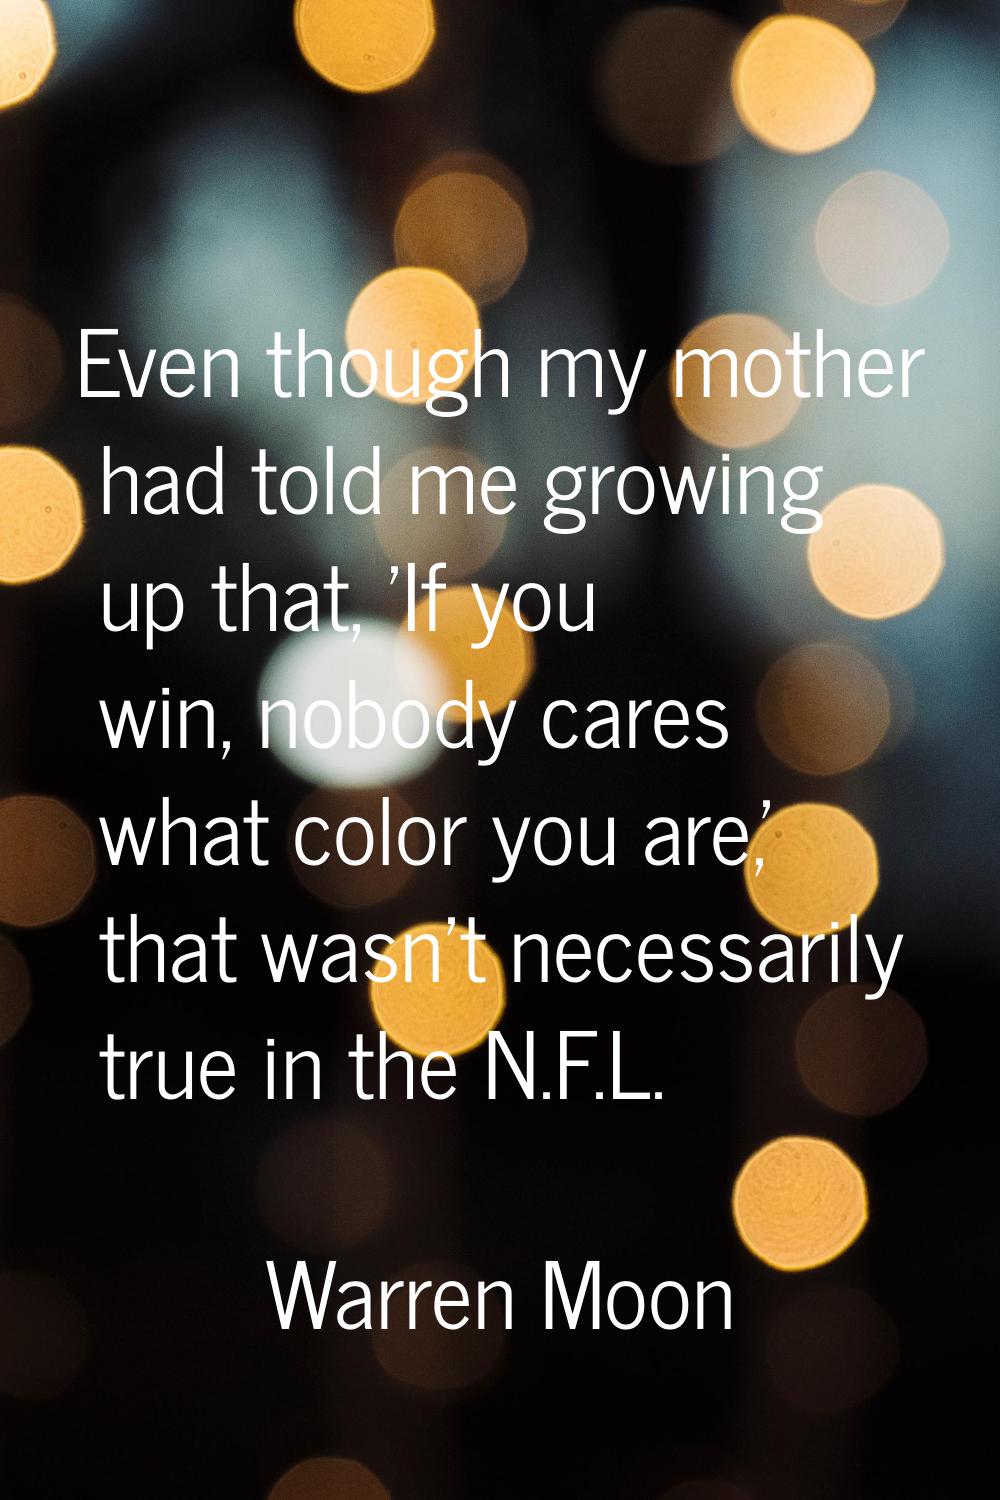 Even though my mother had told me growing up that, 'If you win, nobody cares what color you are,' t